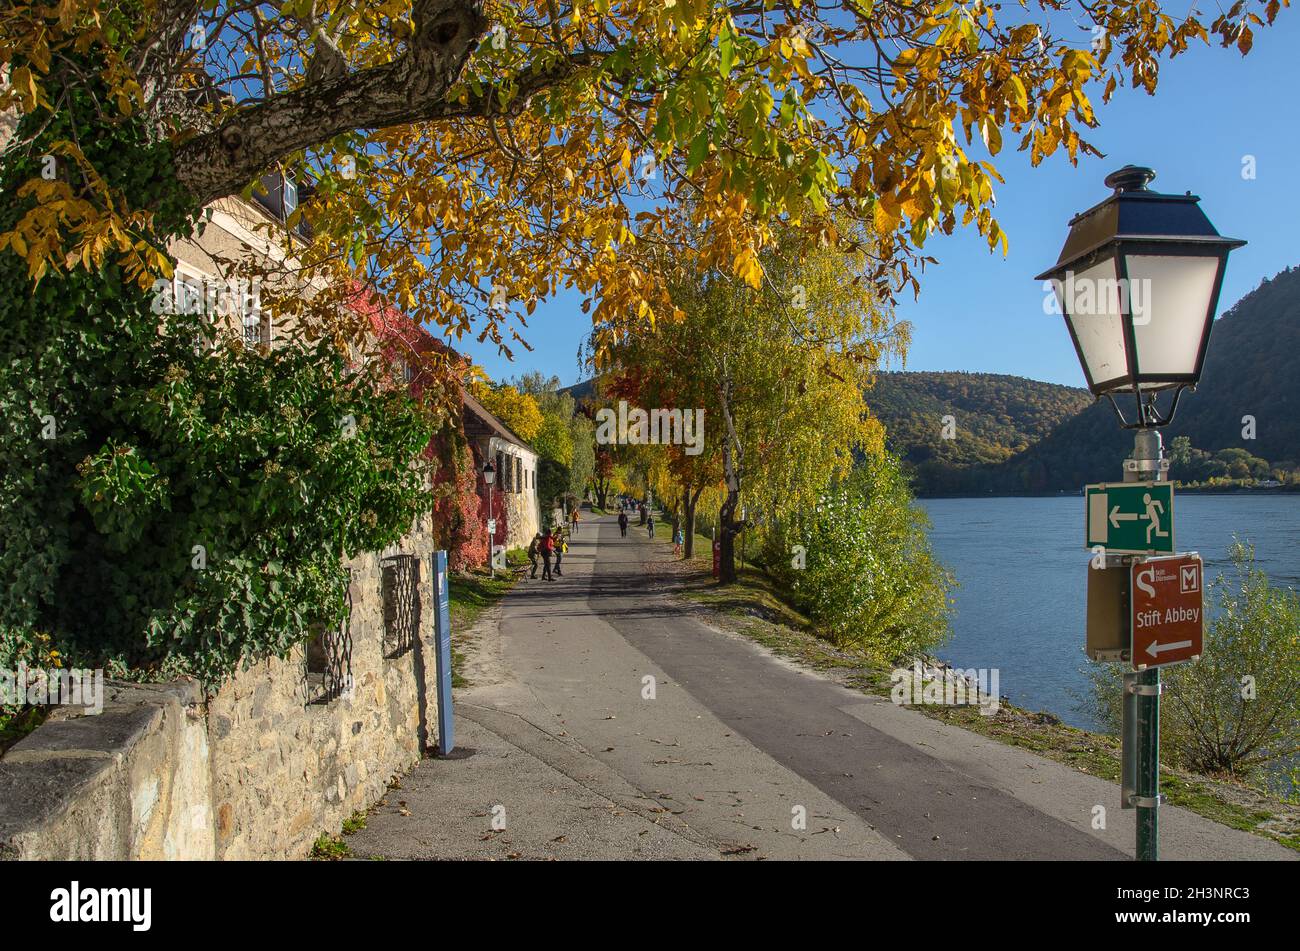 Dürnstein, a small town on the Danube river in the Krems-Land district, is one of the most-visited tourist destinations in the Wachau region. Stock Photo